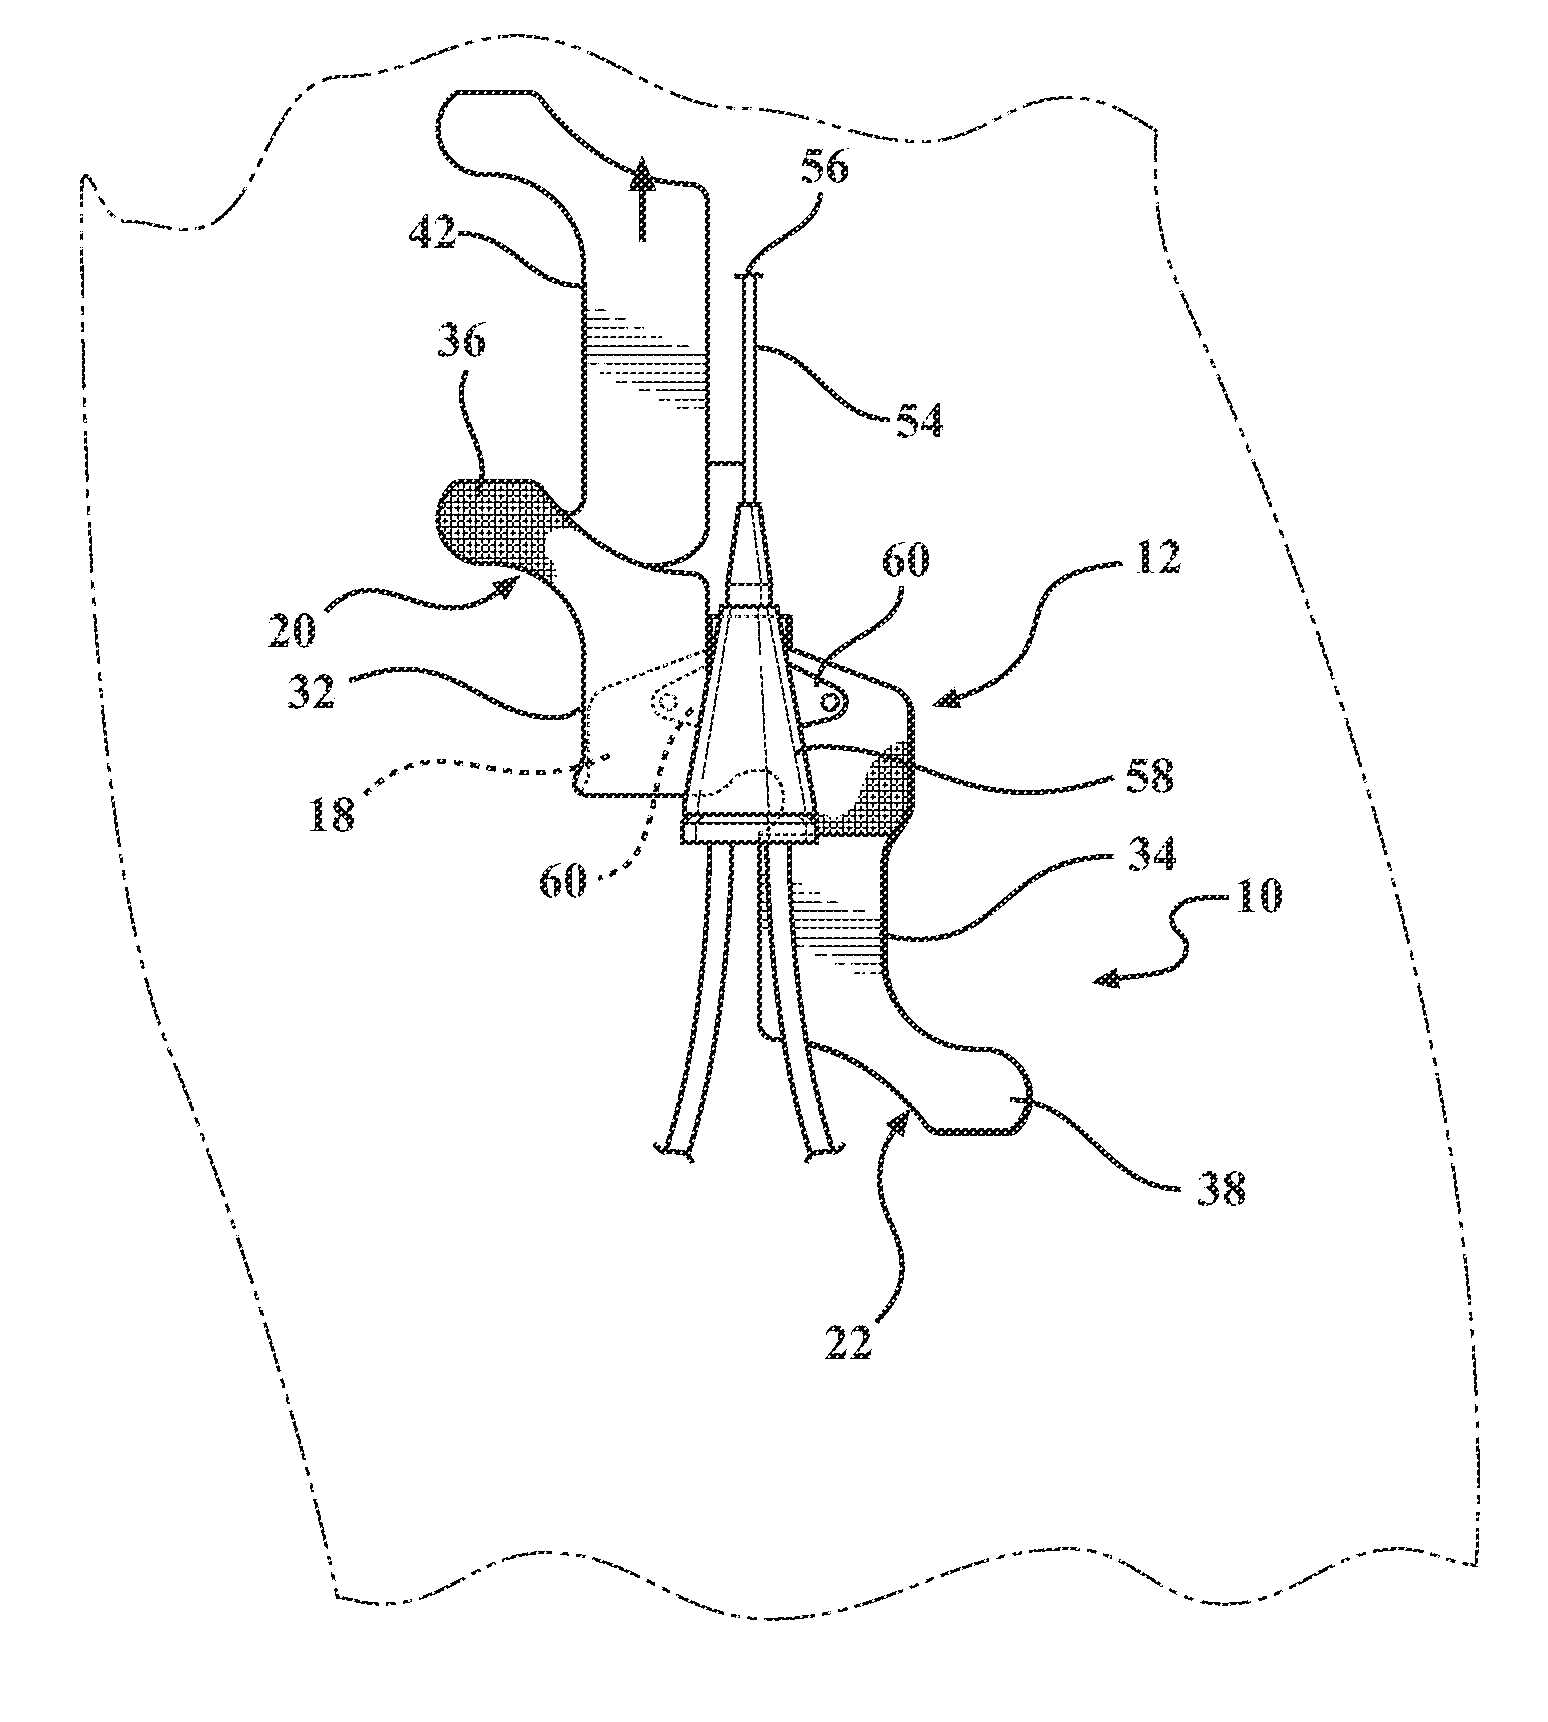 Catheter securement device to secure silicone winged piccs